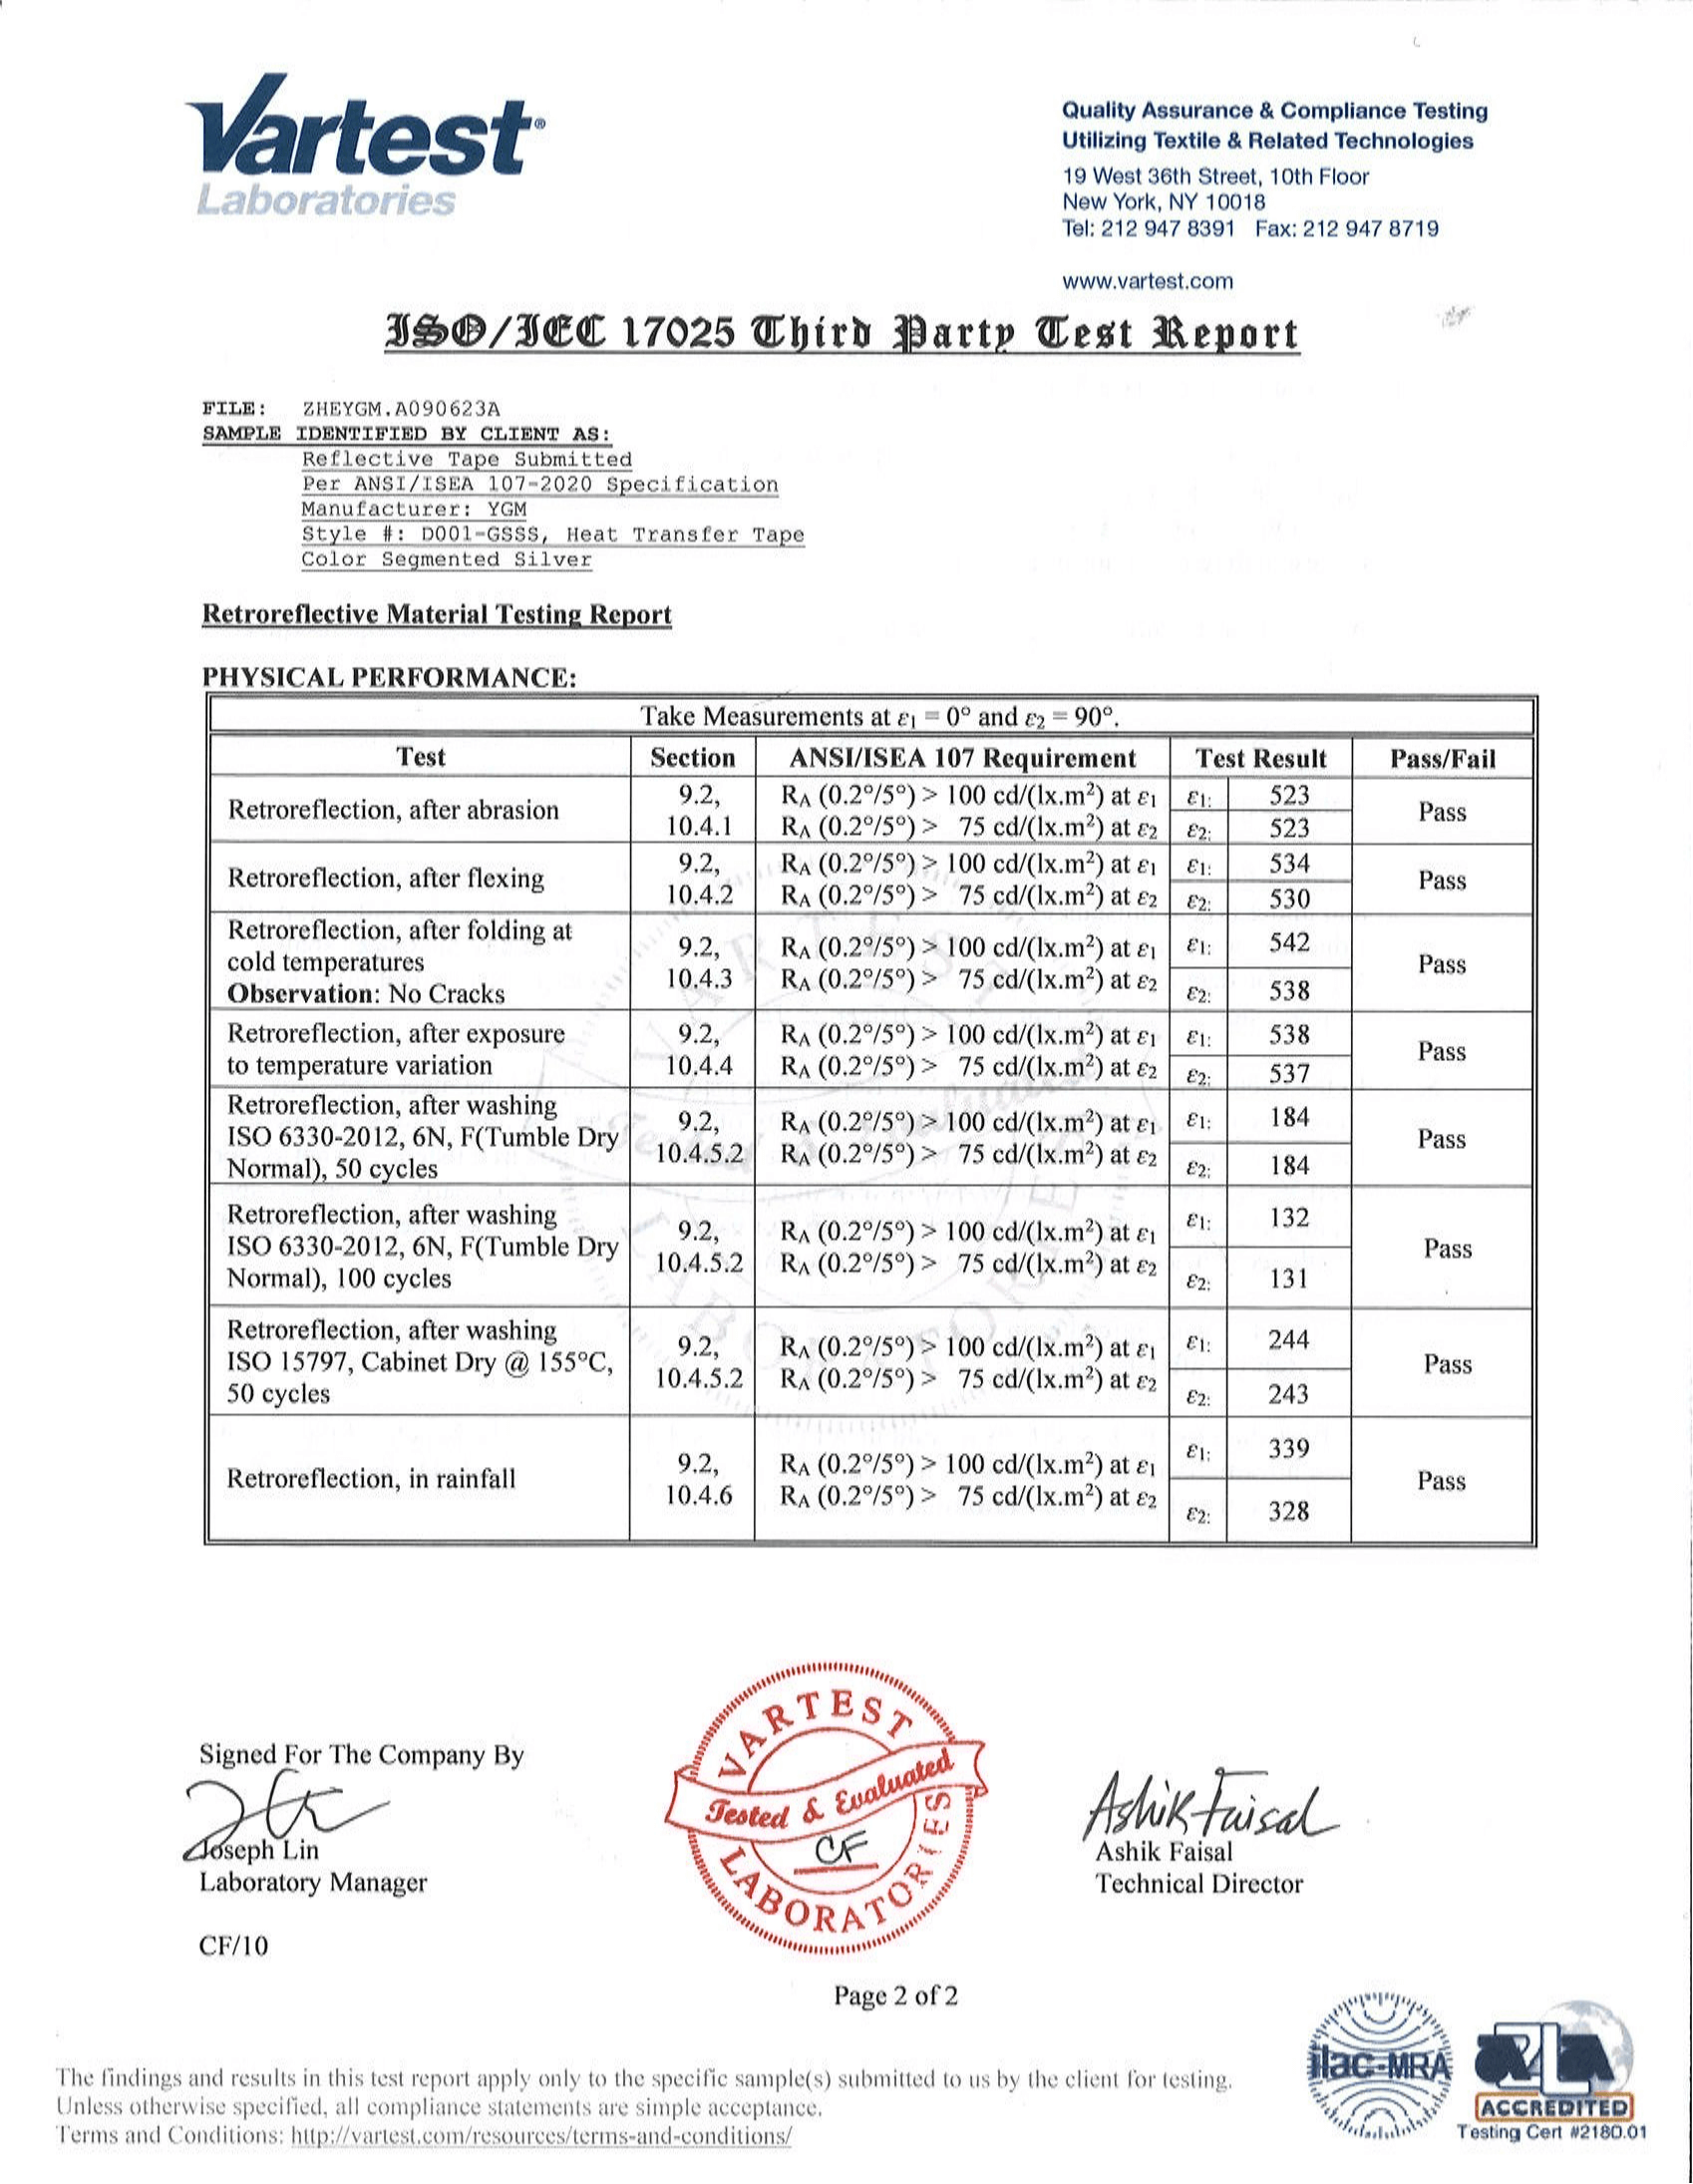 ANSI/ISEA 107 Certificate & Test Report for Heat Transfer Tape Color Segmented Silver(D001-GSSS Product)4